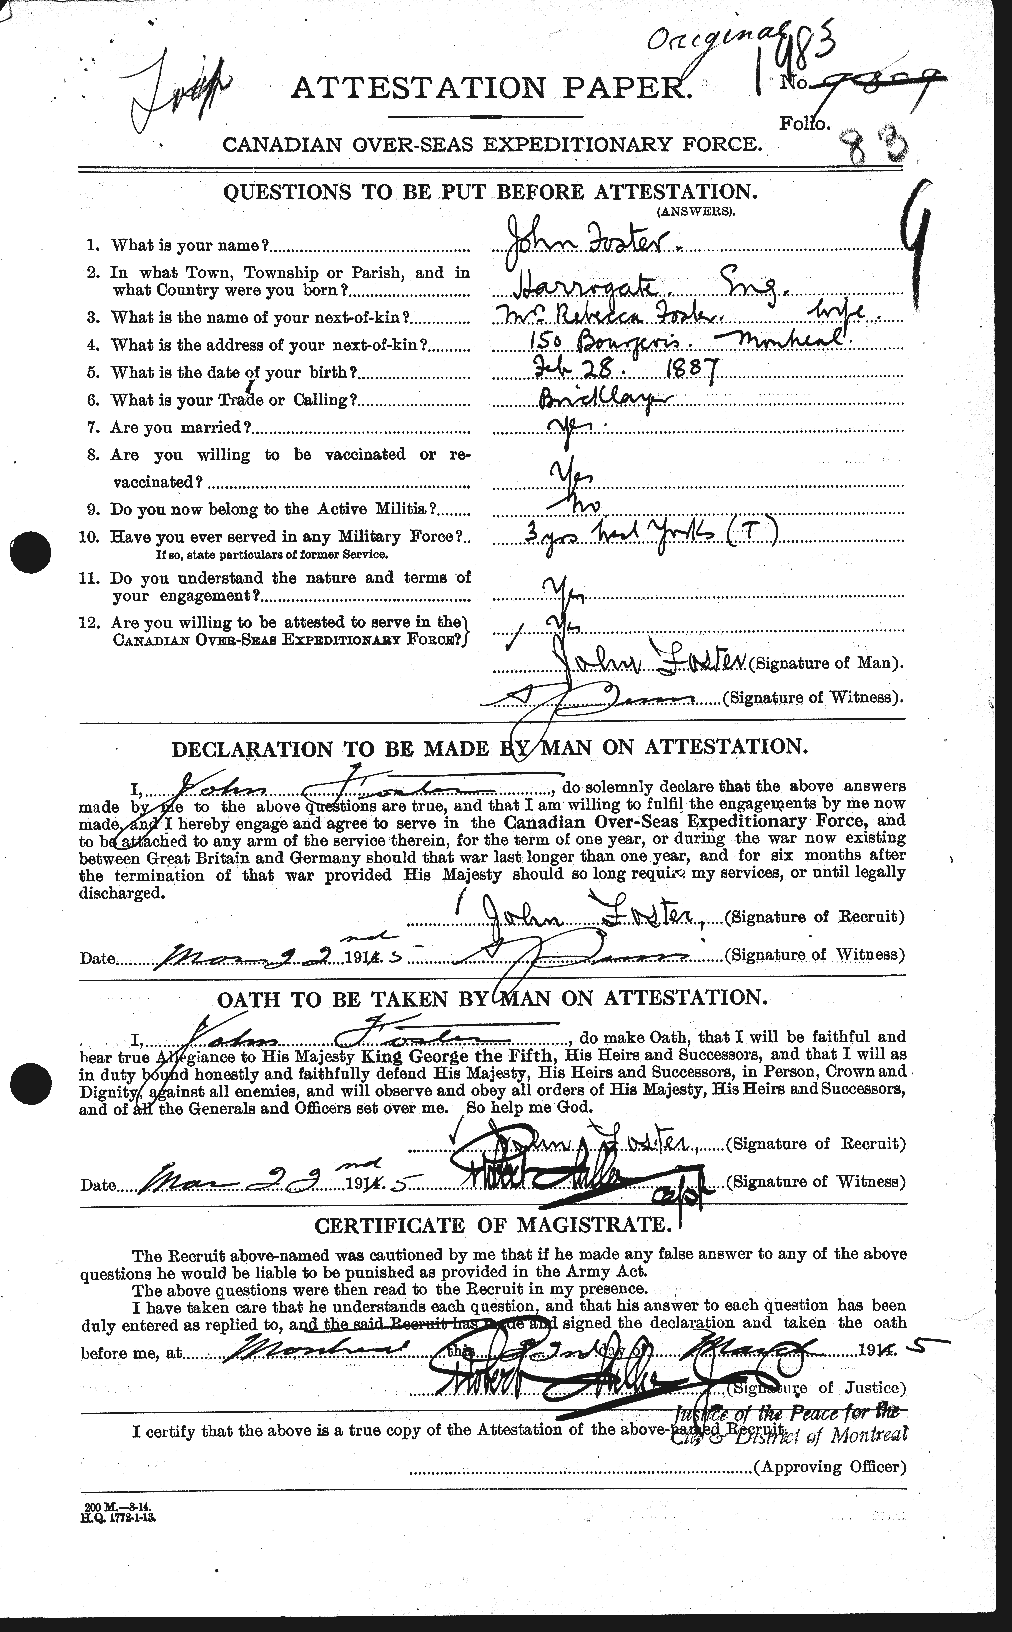 Personnel Records of the First World War - CEF 333333a